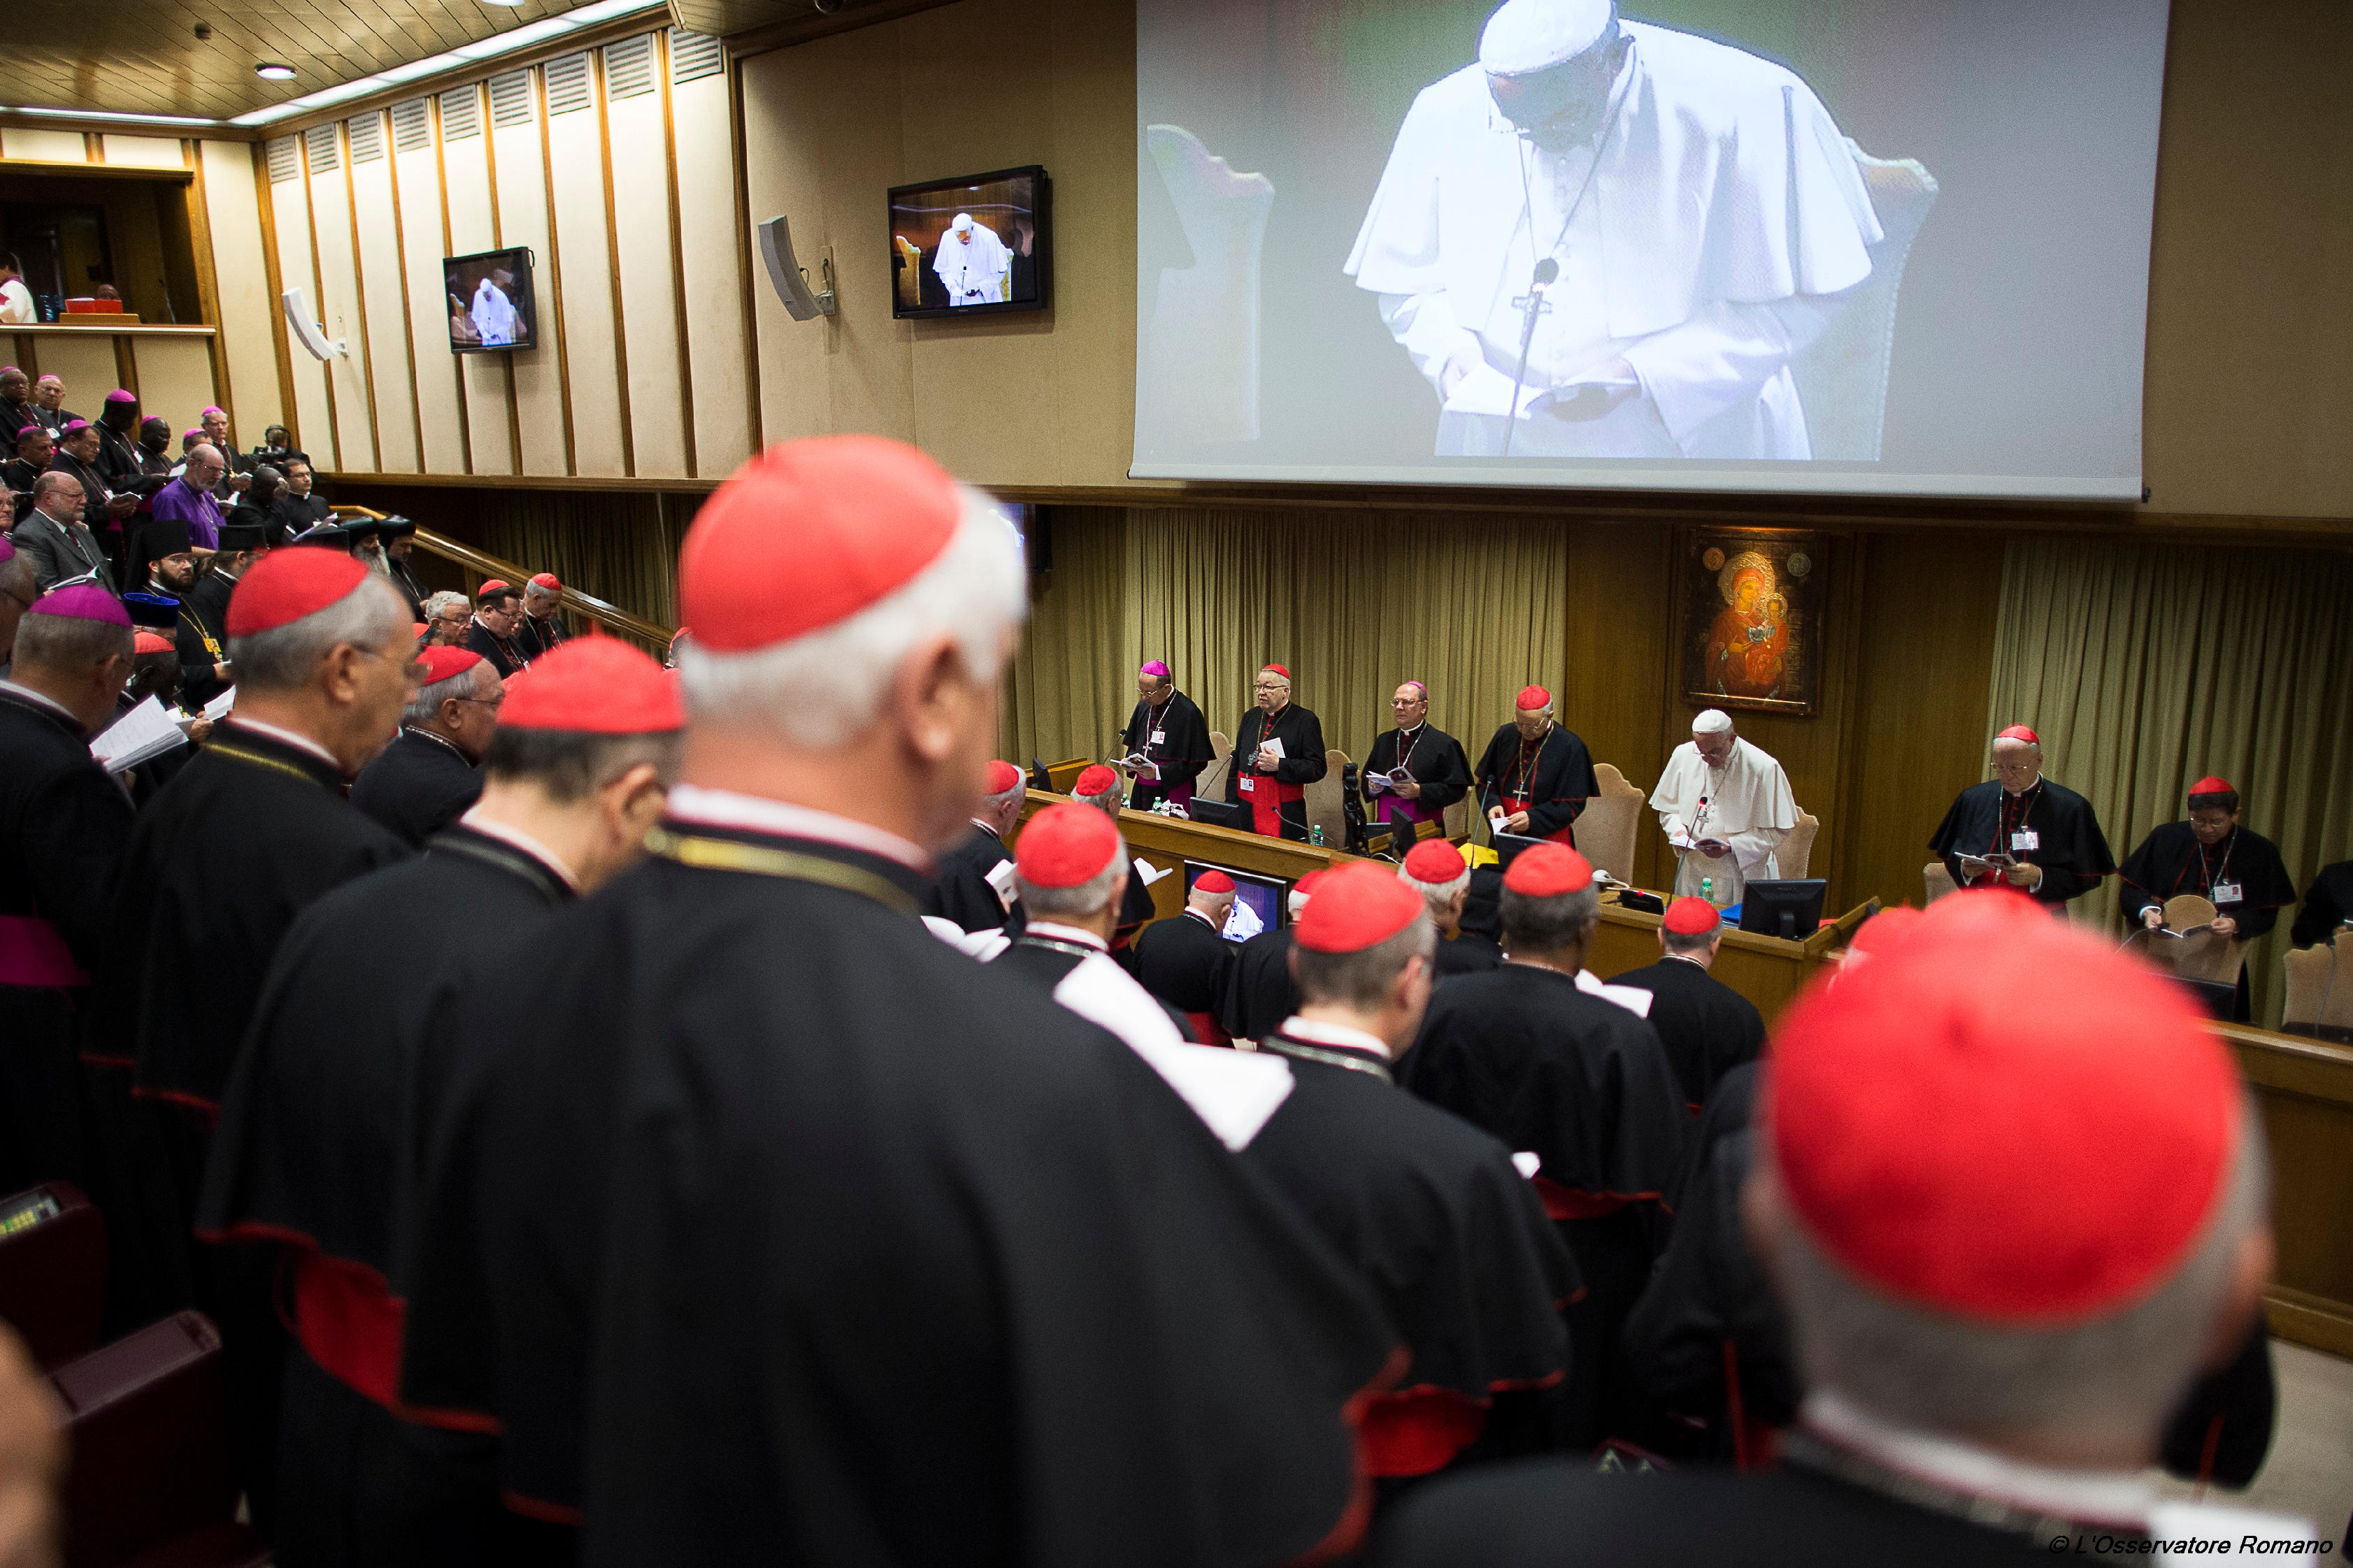 Pope Francis prays at the first session of the Synod of Bishops